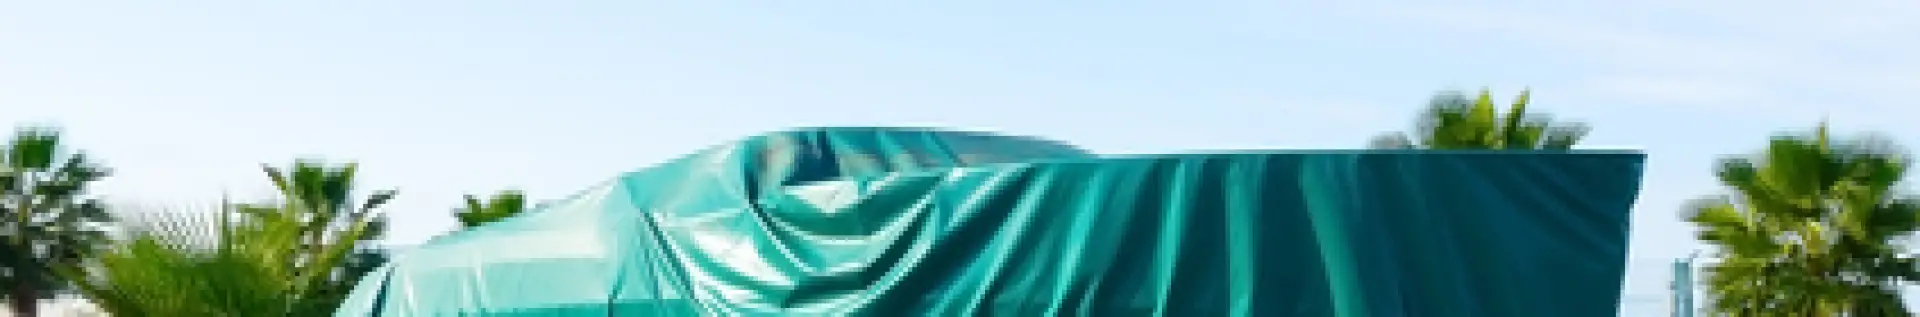 Tarpaulins for boat covers